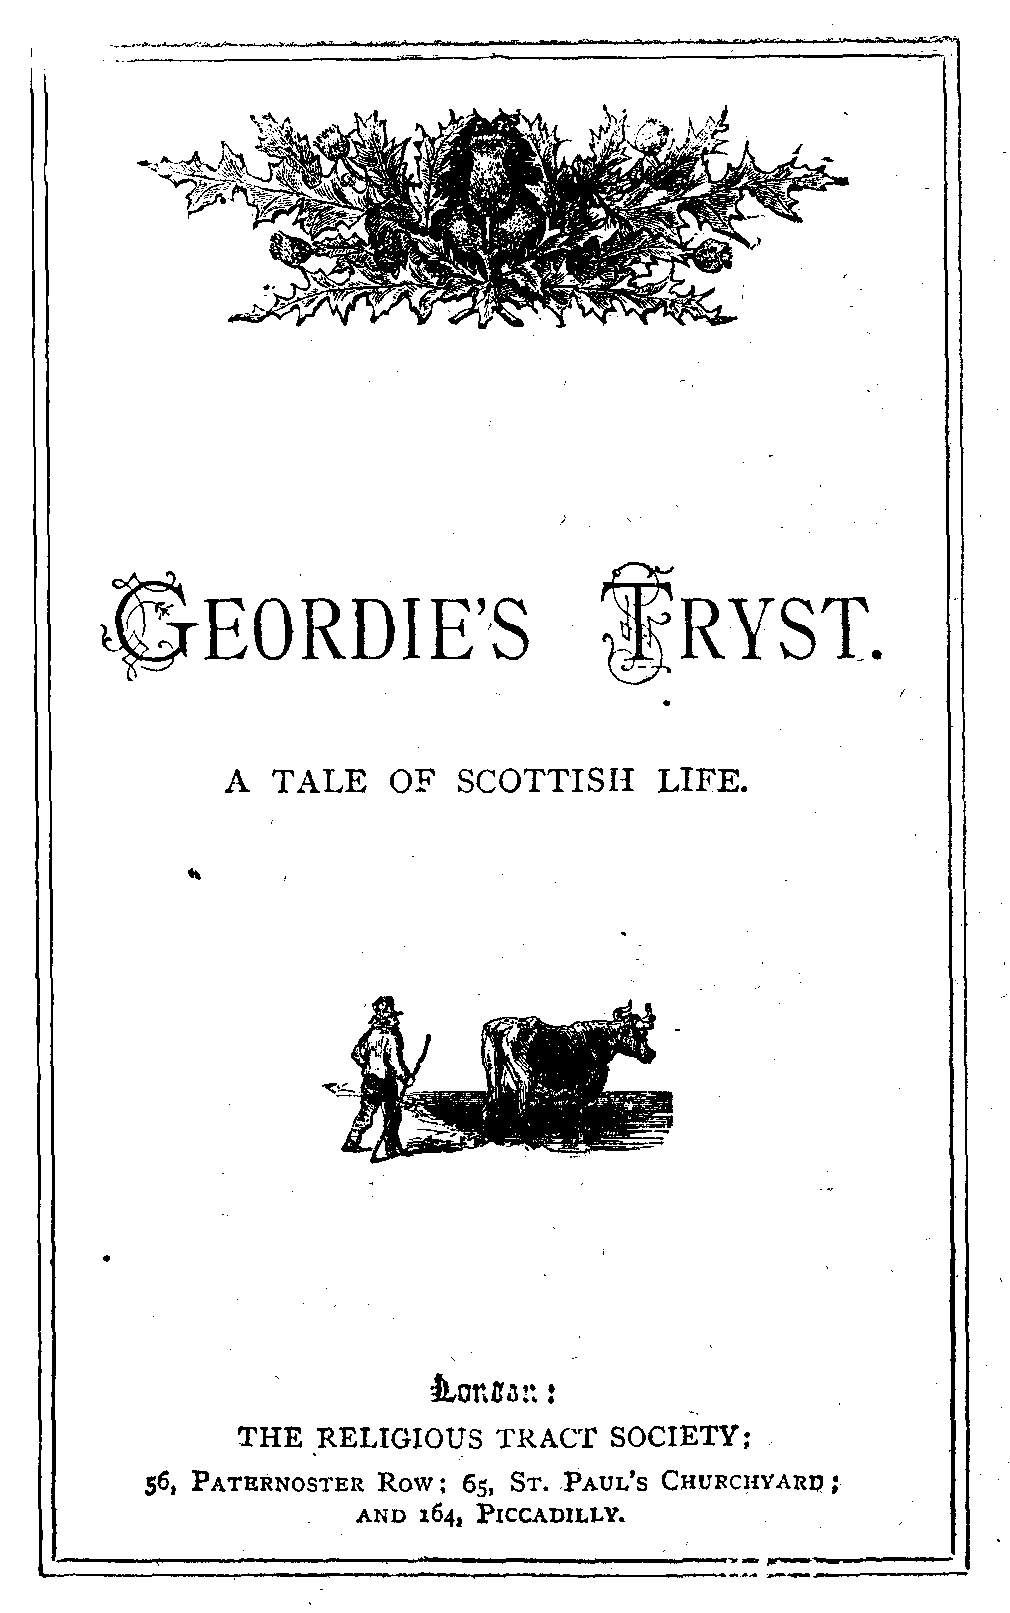 TITLE PAGE